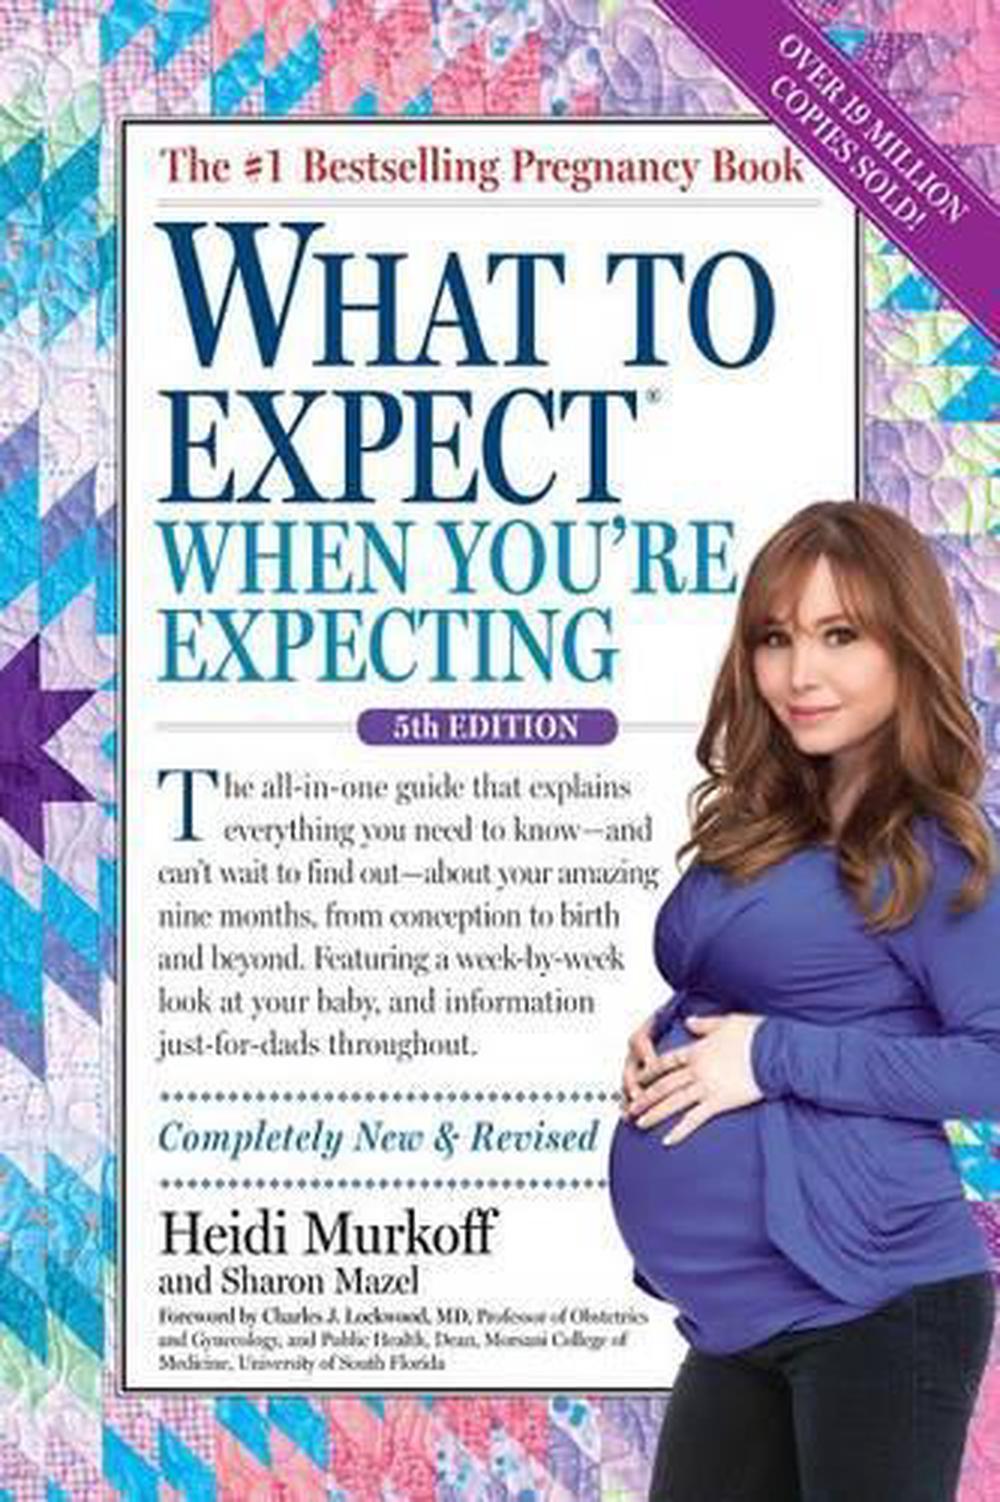 What to Expect When You're Expecting by Heidi Murkoff, Hardcover